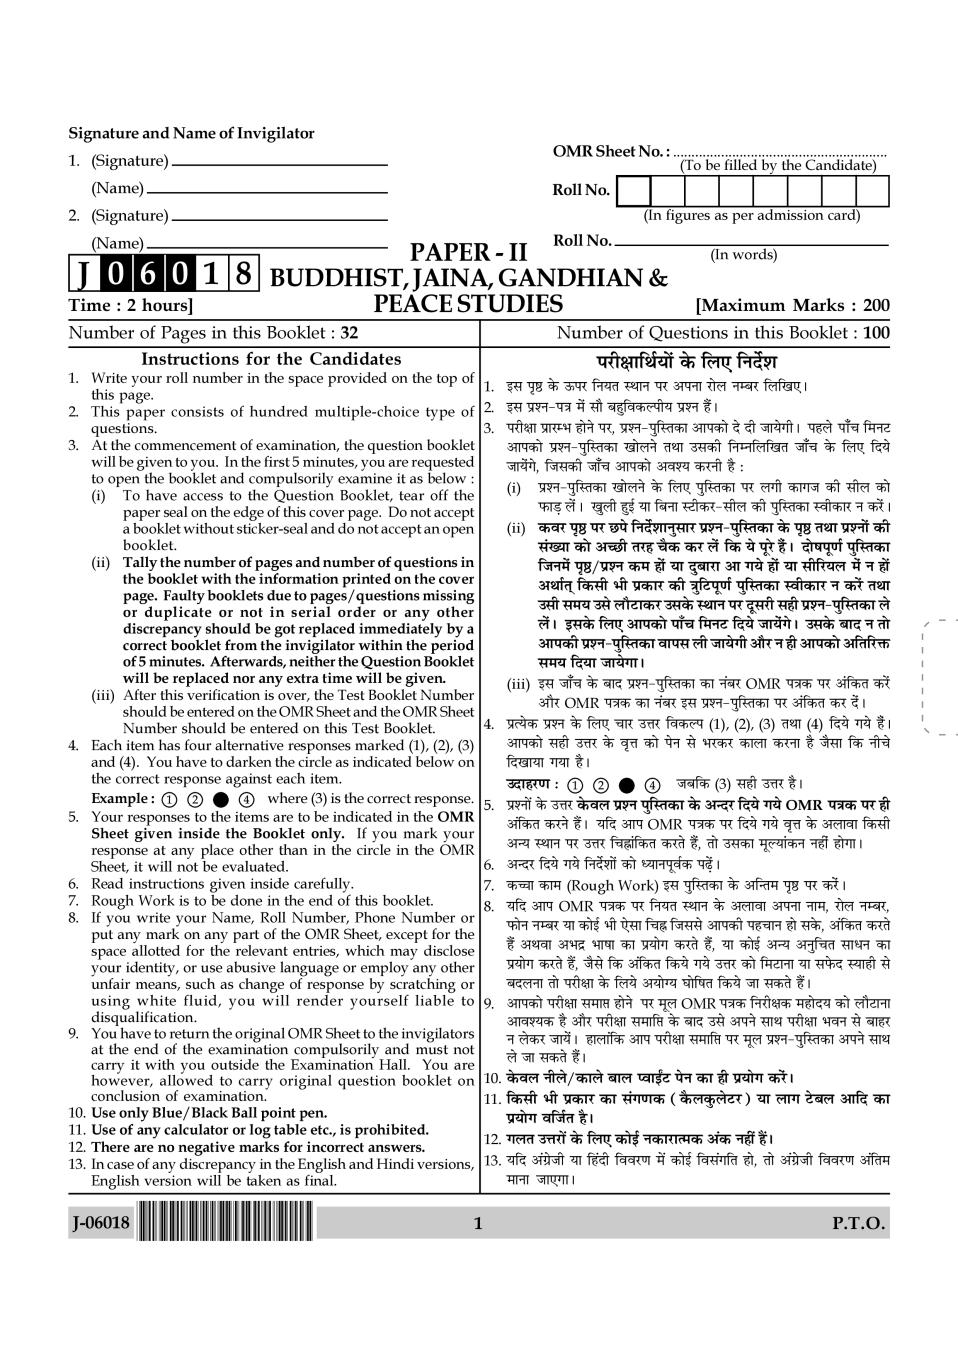 UGC NET Buddhist Question Paper 2018 - Page 1